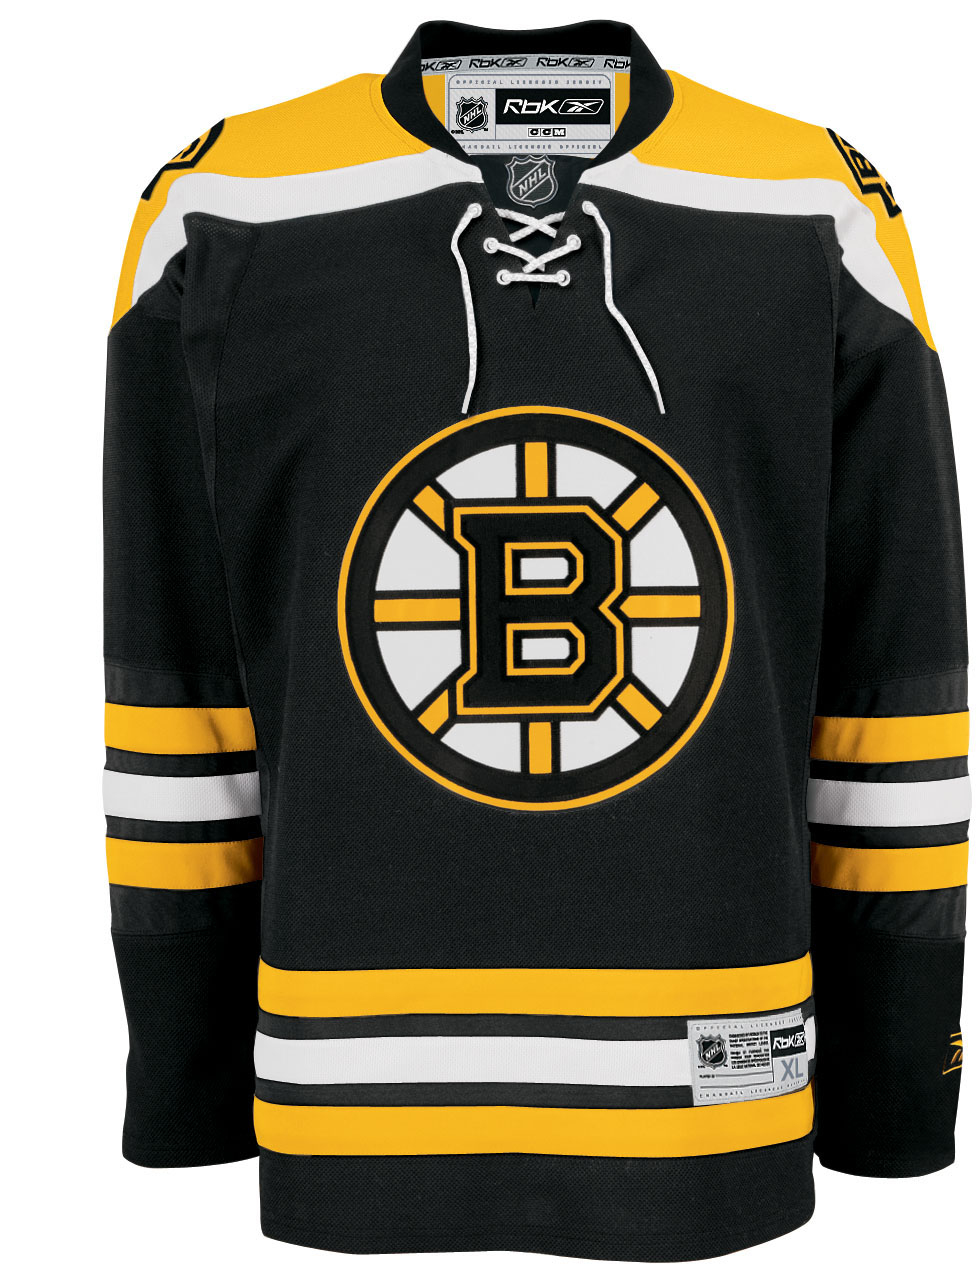 Top 10 NHL Jerseys of All Time 